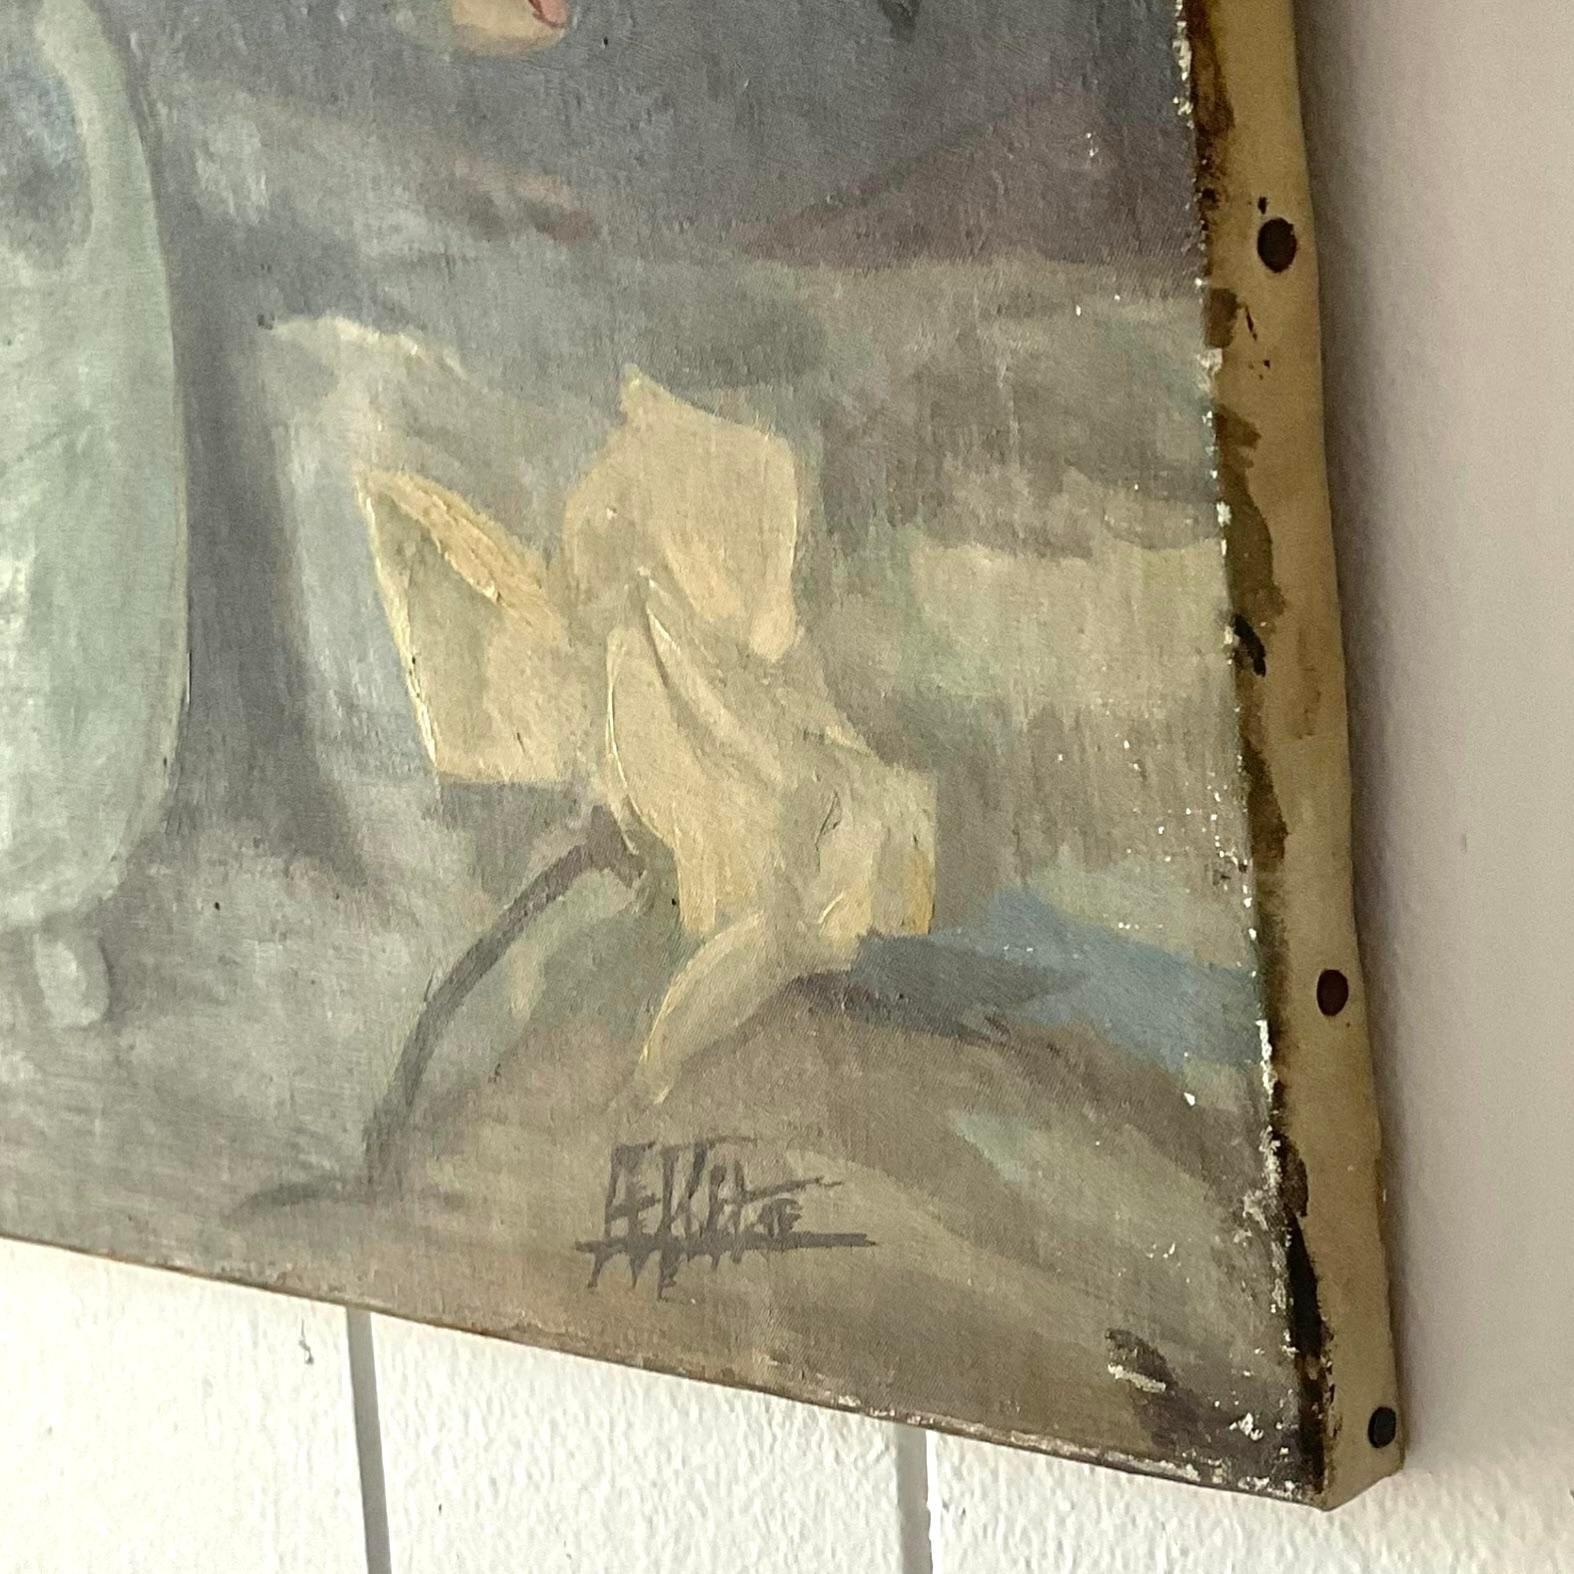 A fabulous vintage Boho original oil painting. A chic floral composition done in the period style. An all over patina from time give this piece an extra romantic feel. Just add your favorite vintage frame to complete the look. Signed by the artist.